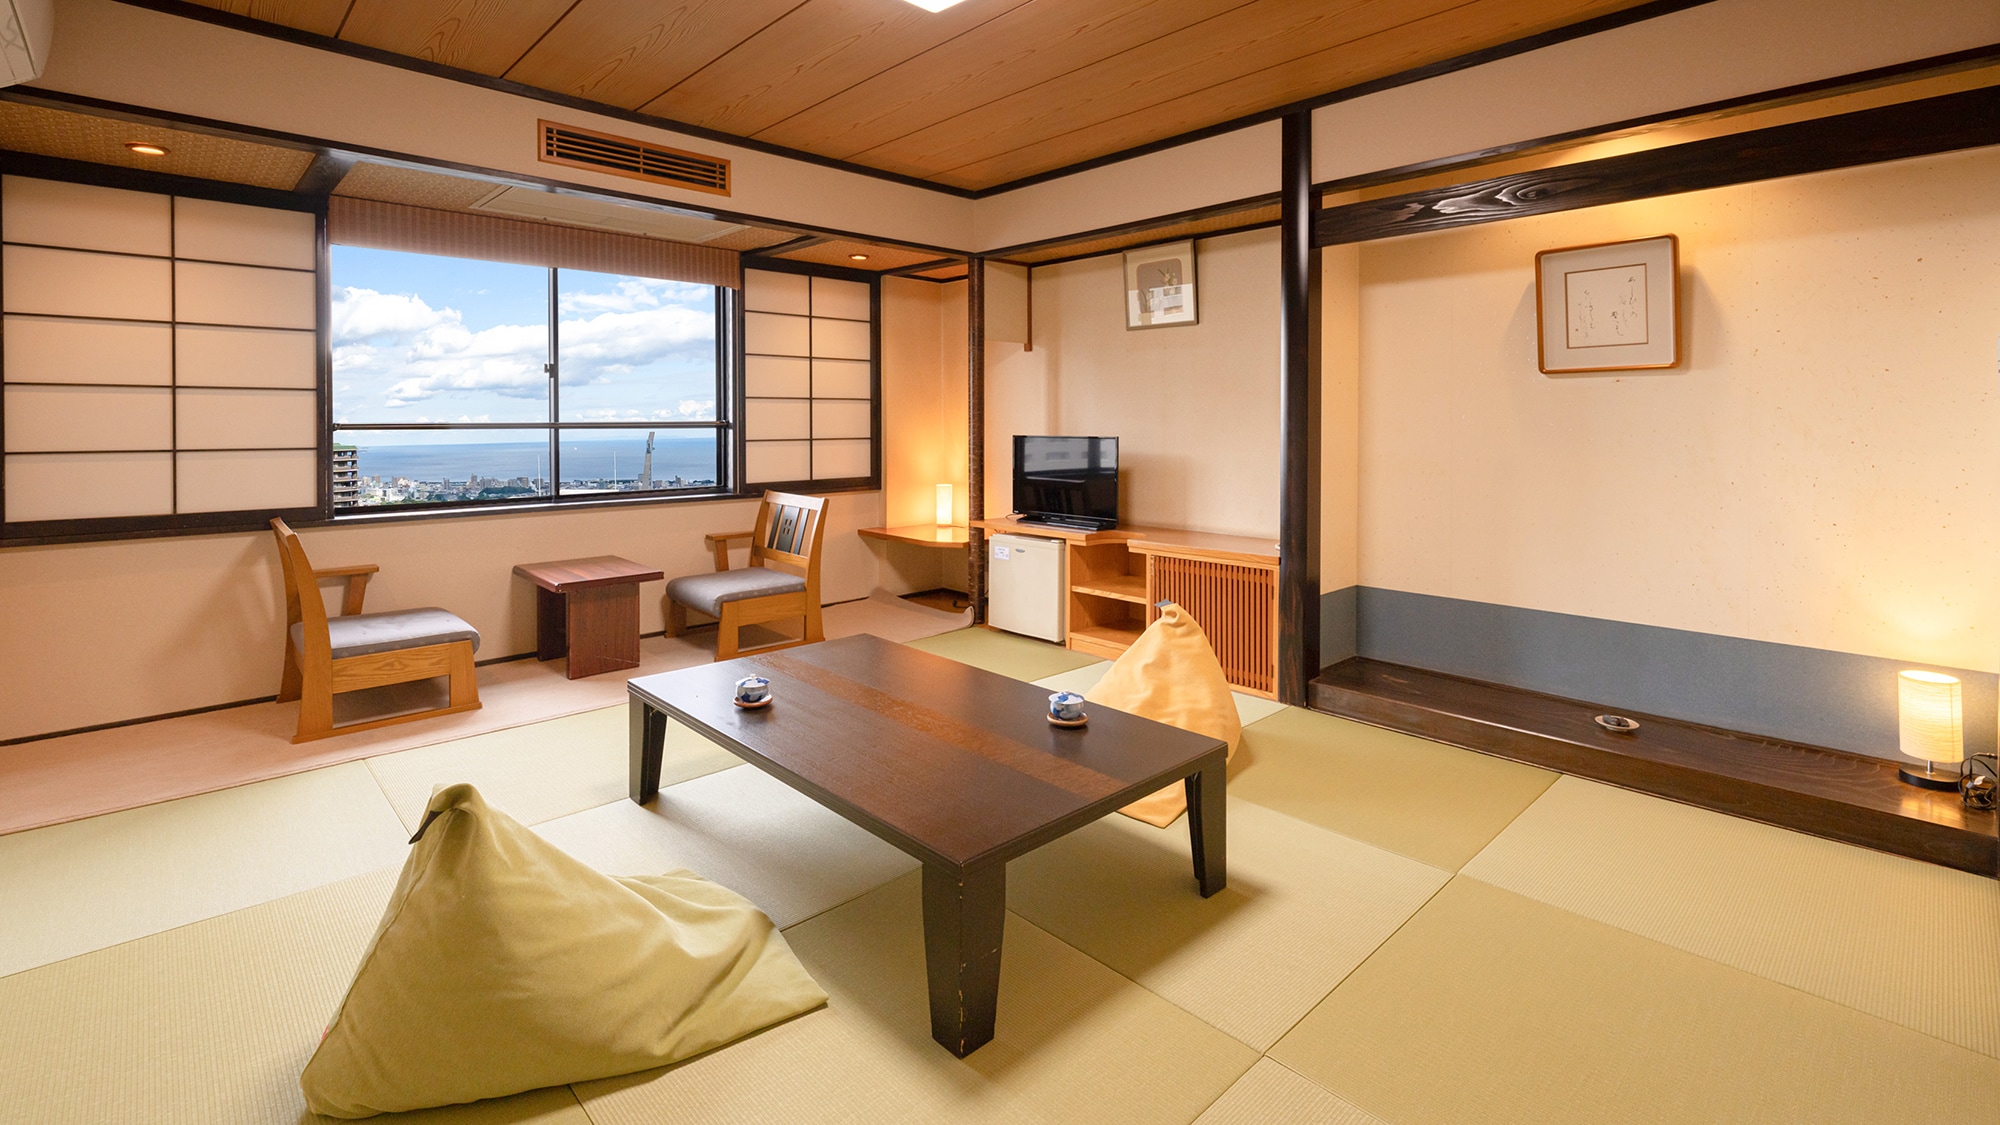 ◆ Oka no Sou ◇ Standard Japanese-style room ◆ A room with antibacterial Ryukyu tatami mats to prevent infectious diseases